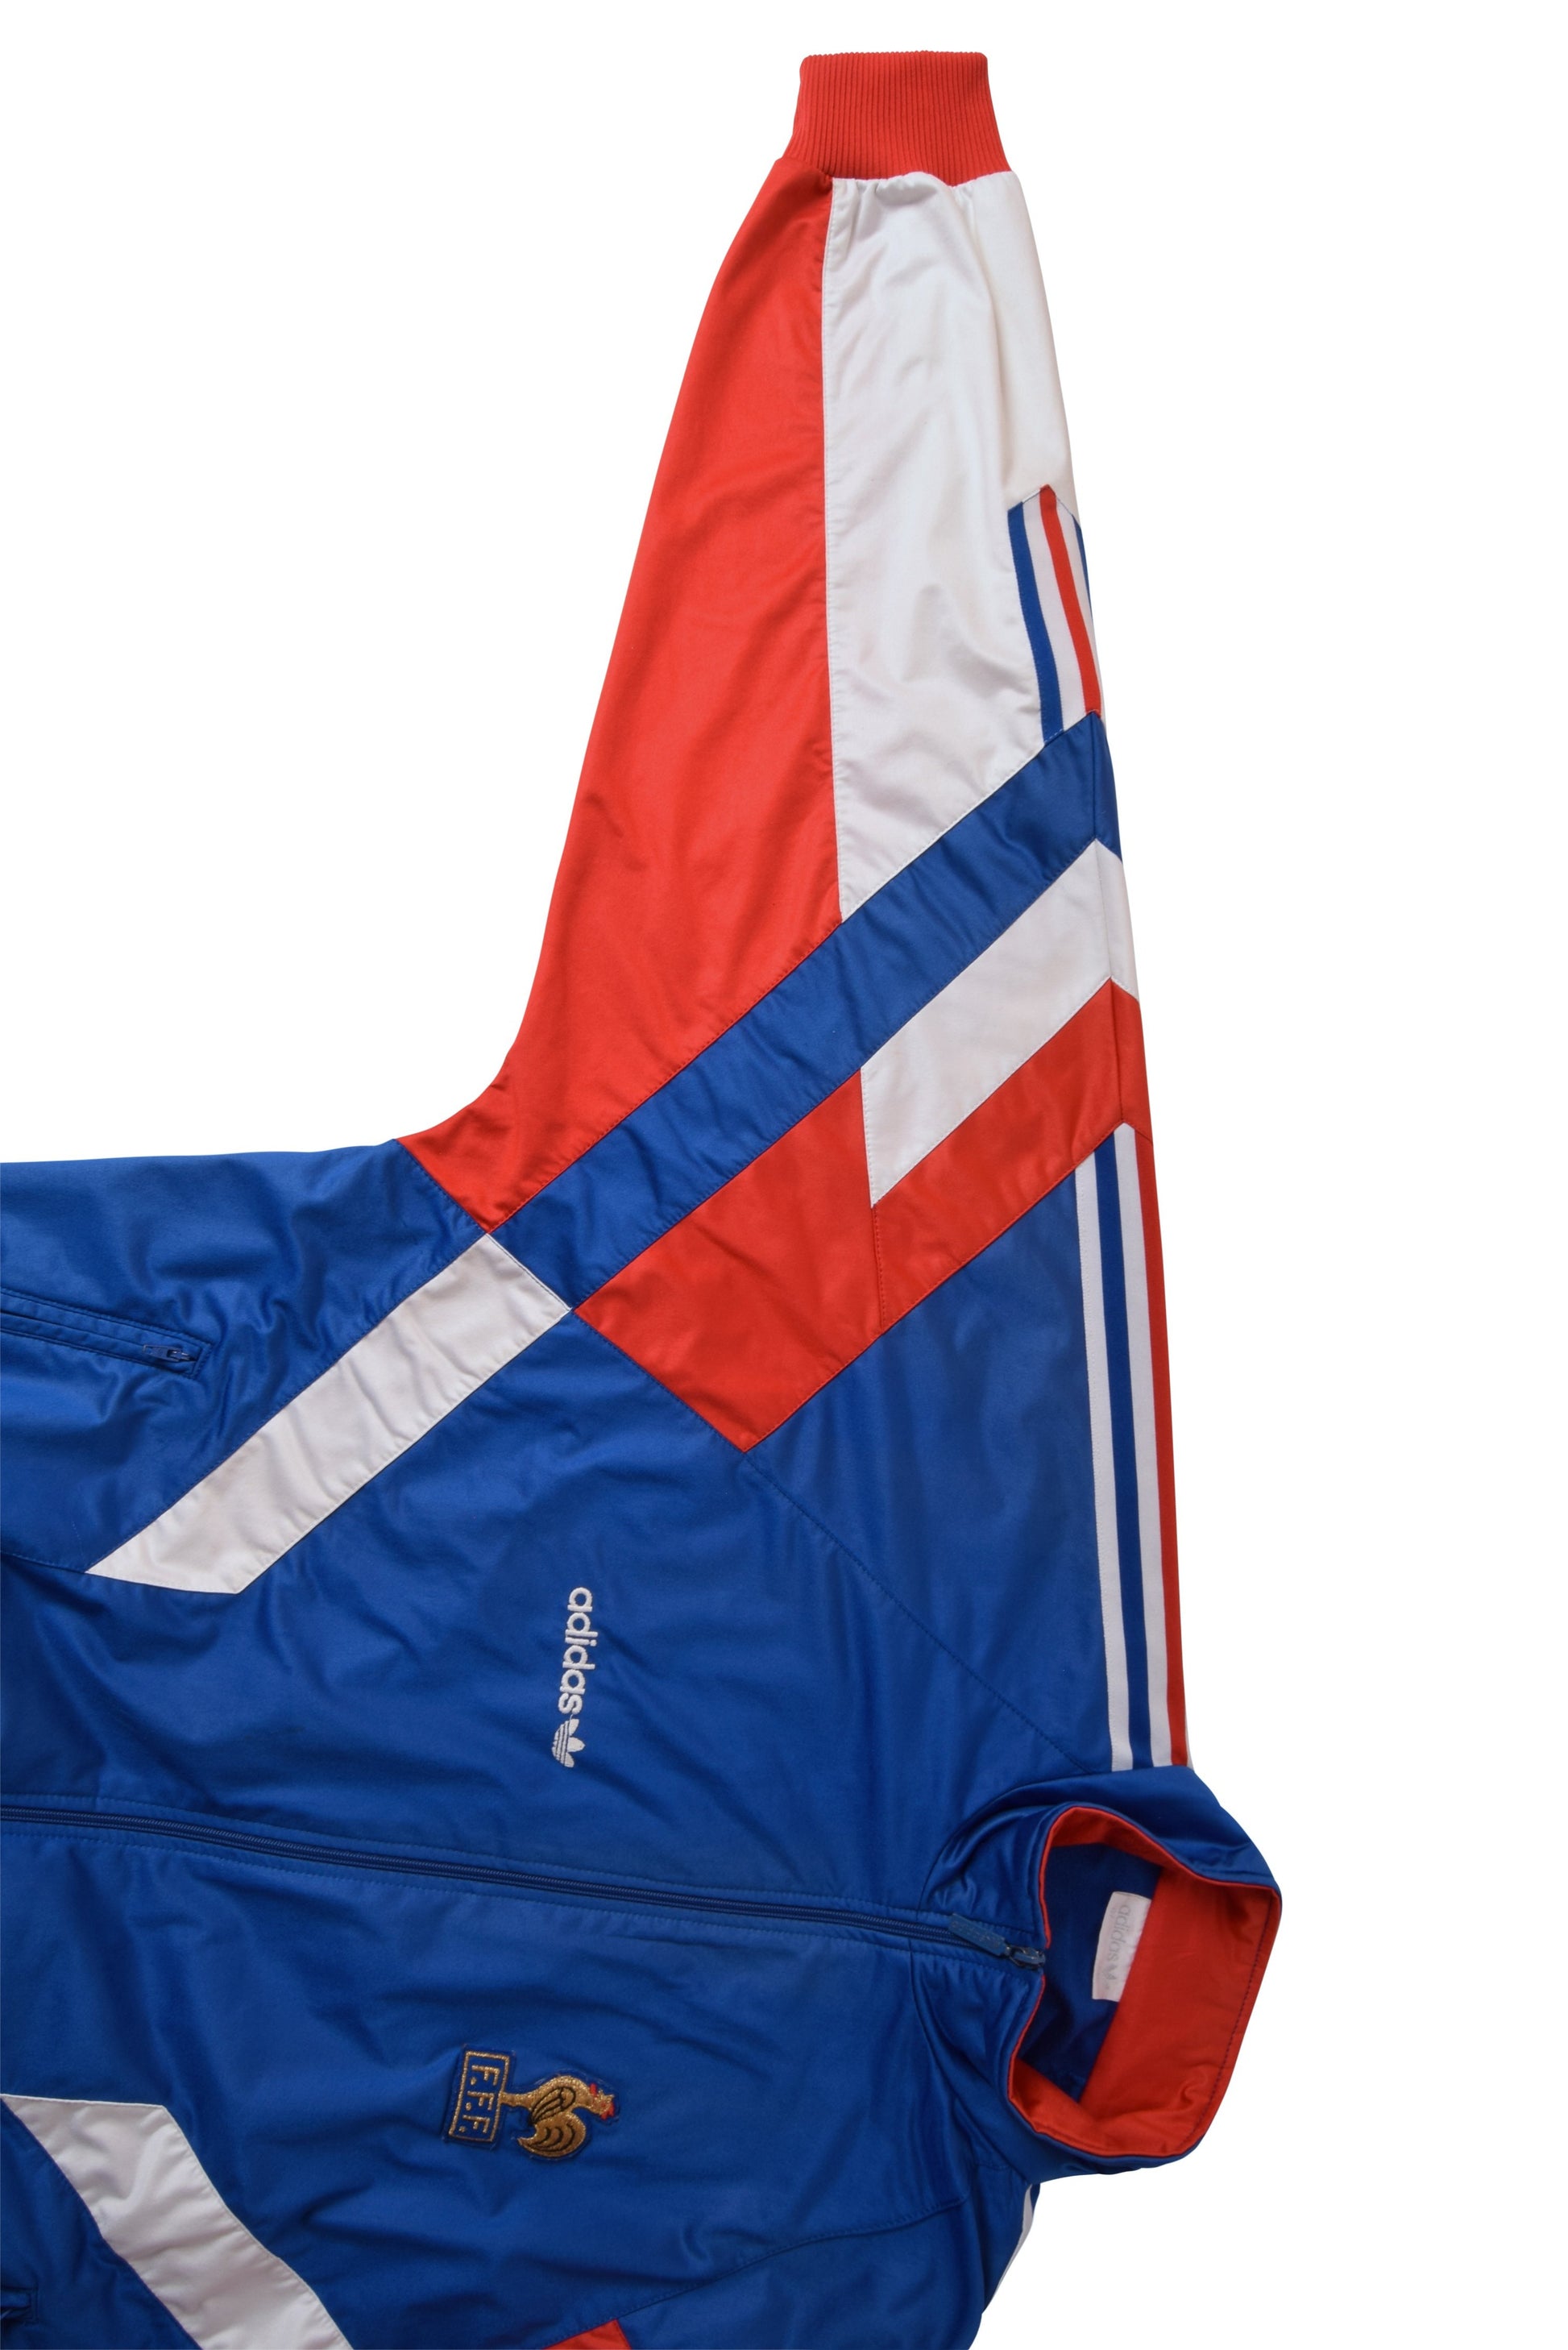 Vintage France Adidas Football Jacket 1990 - 1992 Made in France Size L Blue Red White